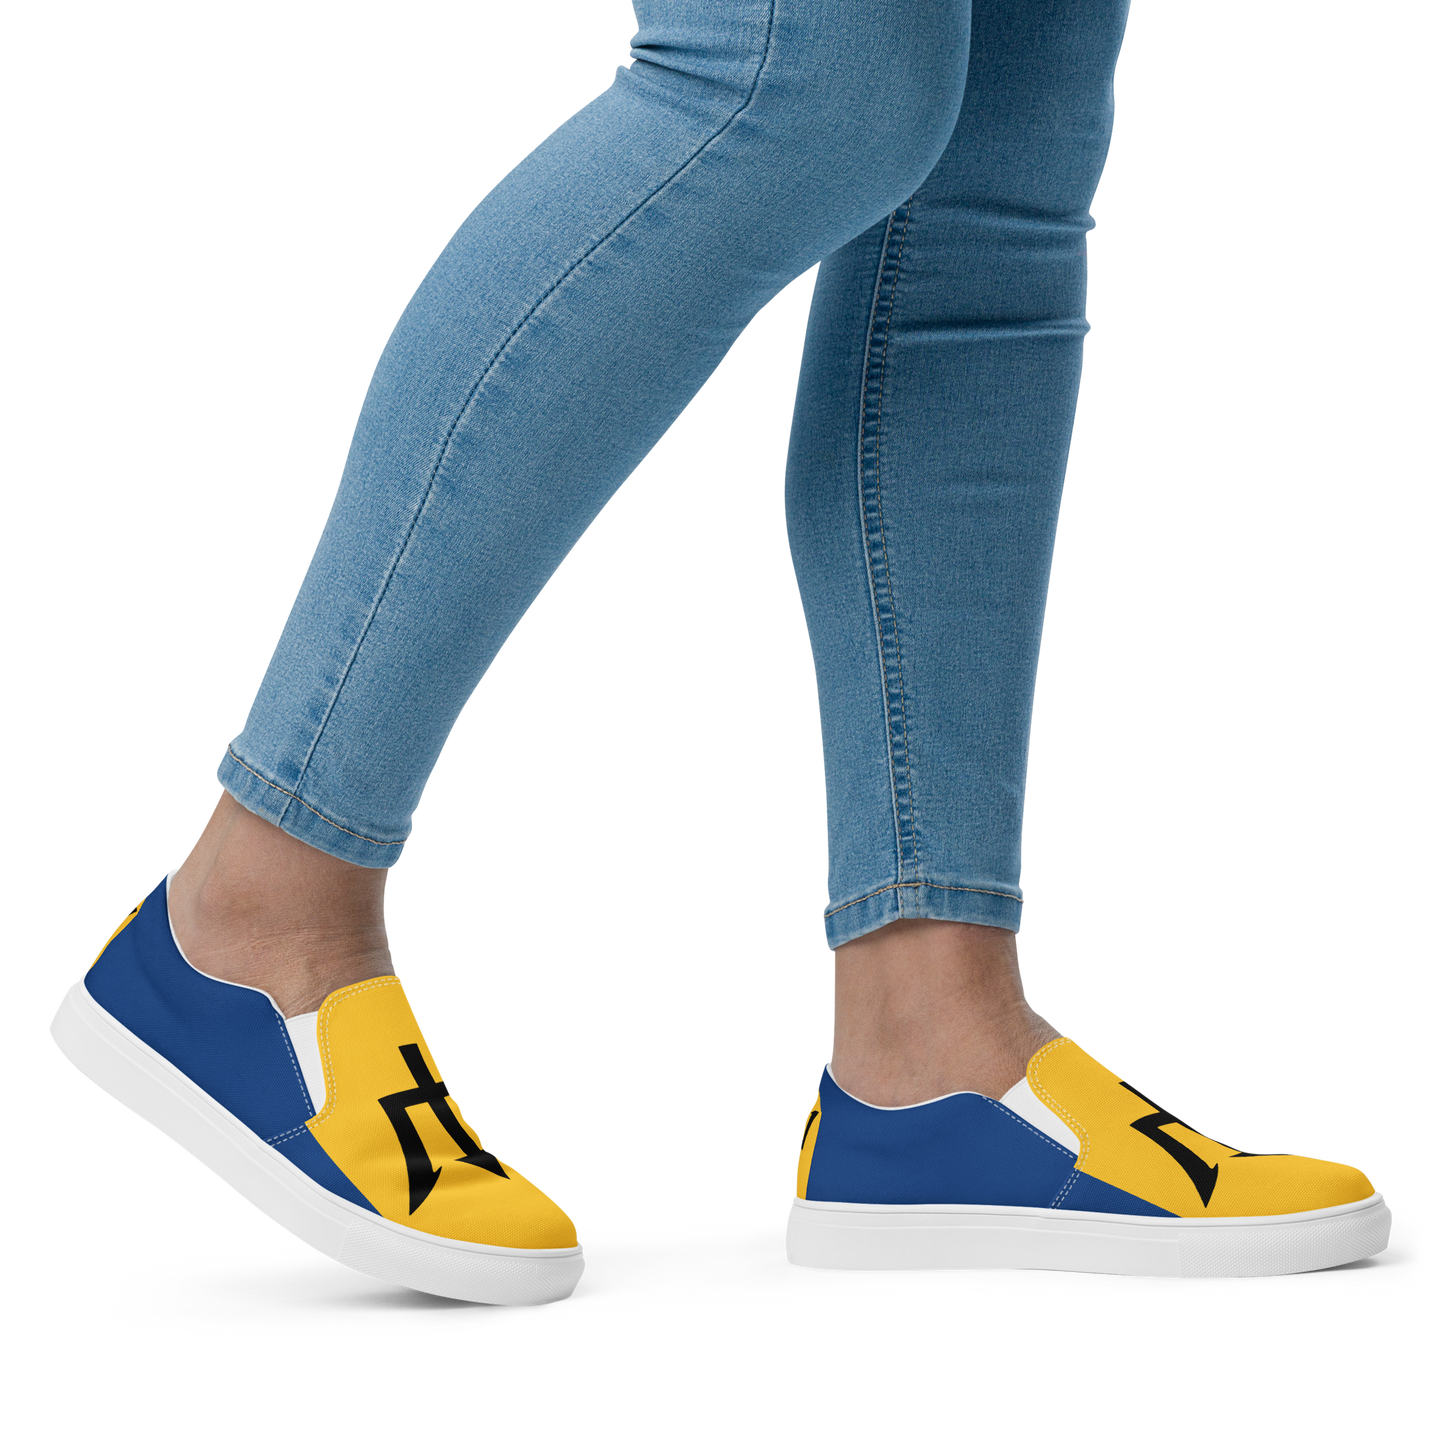 Barbados Women’s slip-on canvas shoes